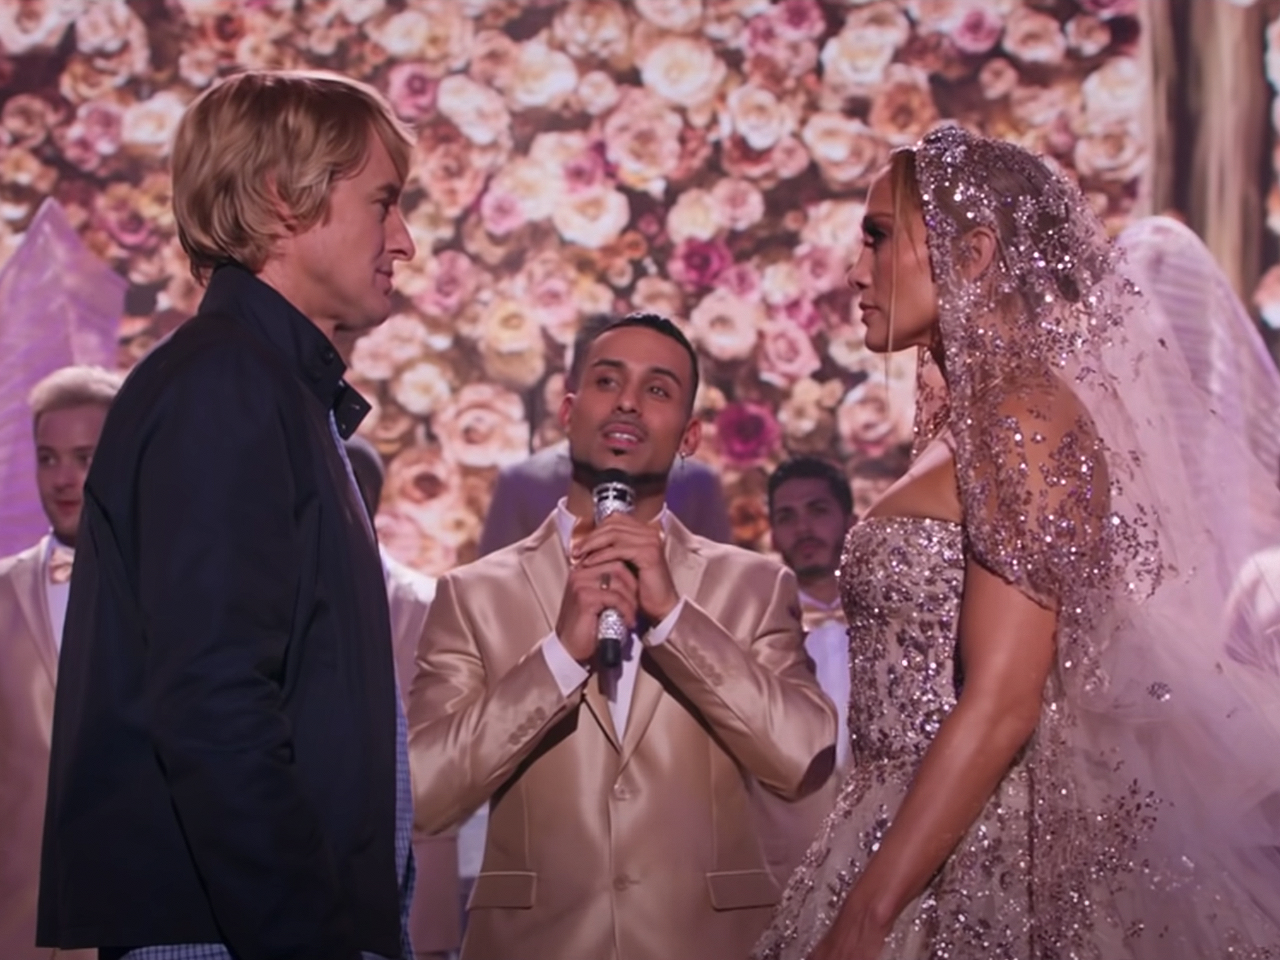 screengrab of Marry Me trailer with Jennifer Lopez and Owen Wilson getting married on stage